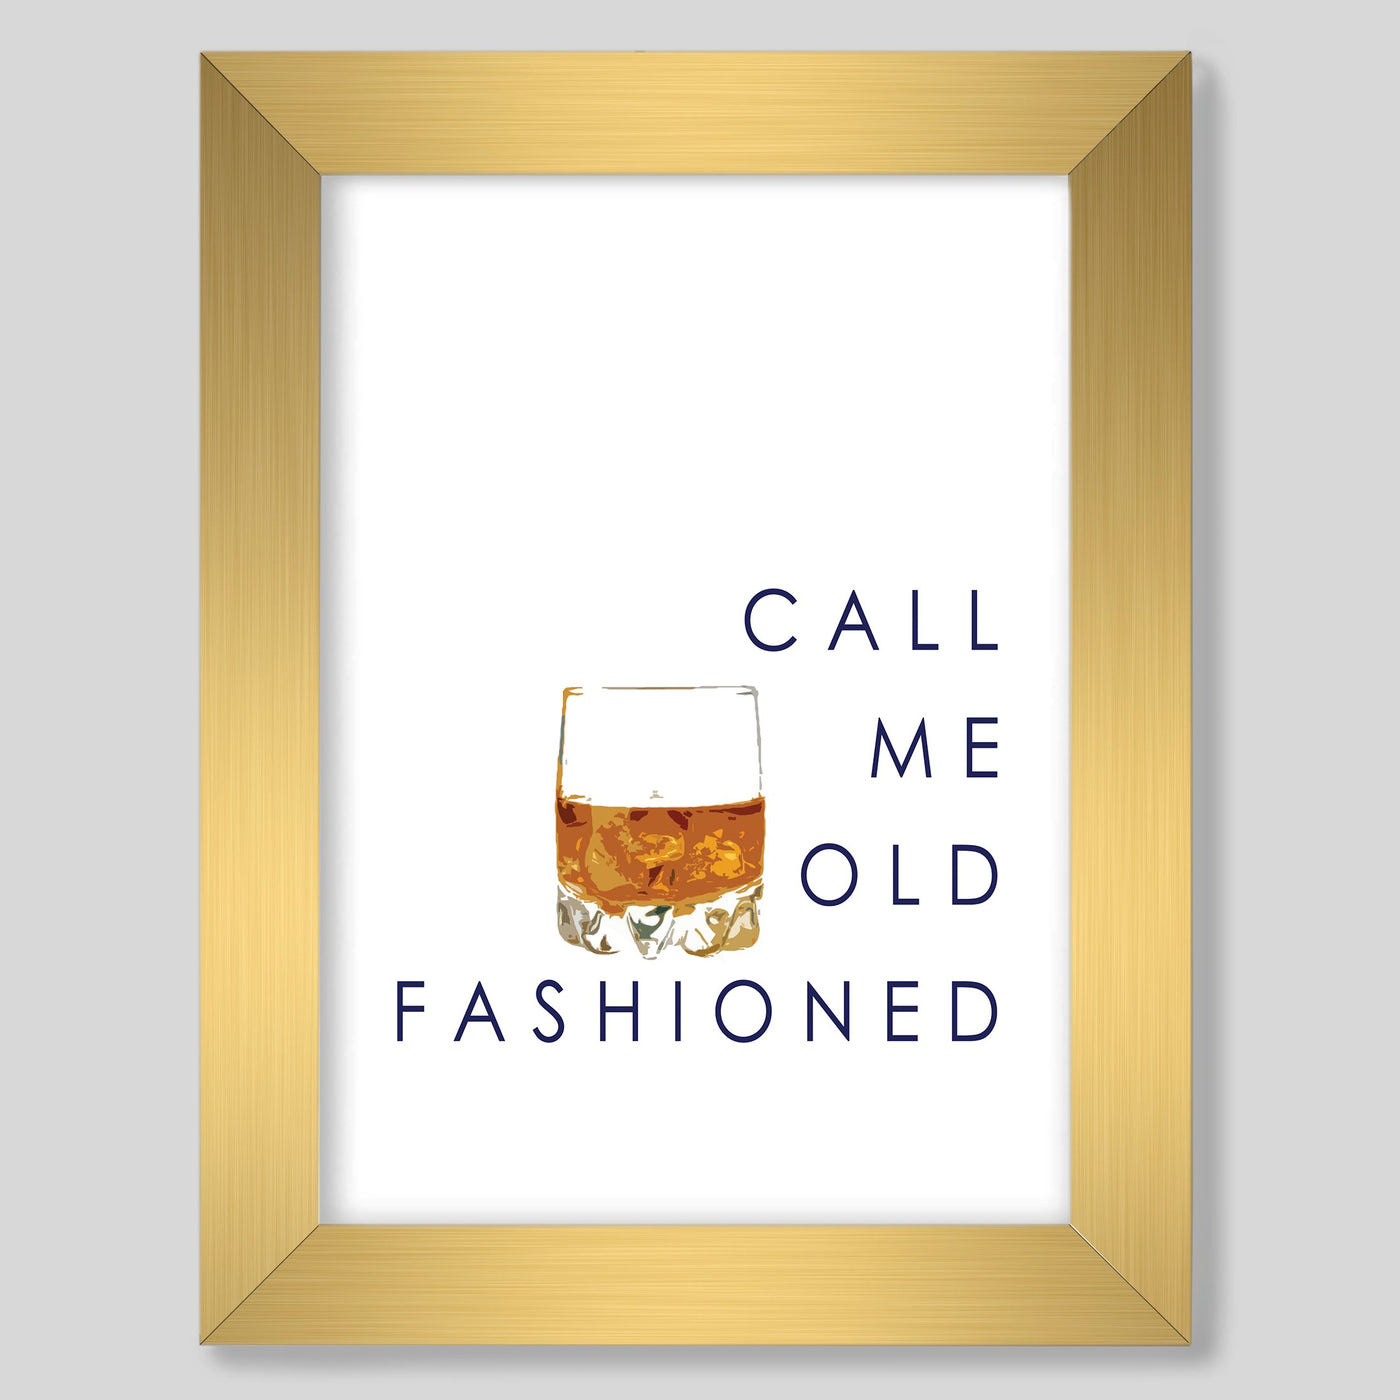 Call Me Old Fashioned Print Gallery Print 8x10 / Gold Frame Katie Kime